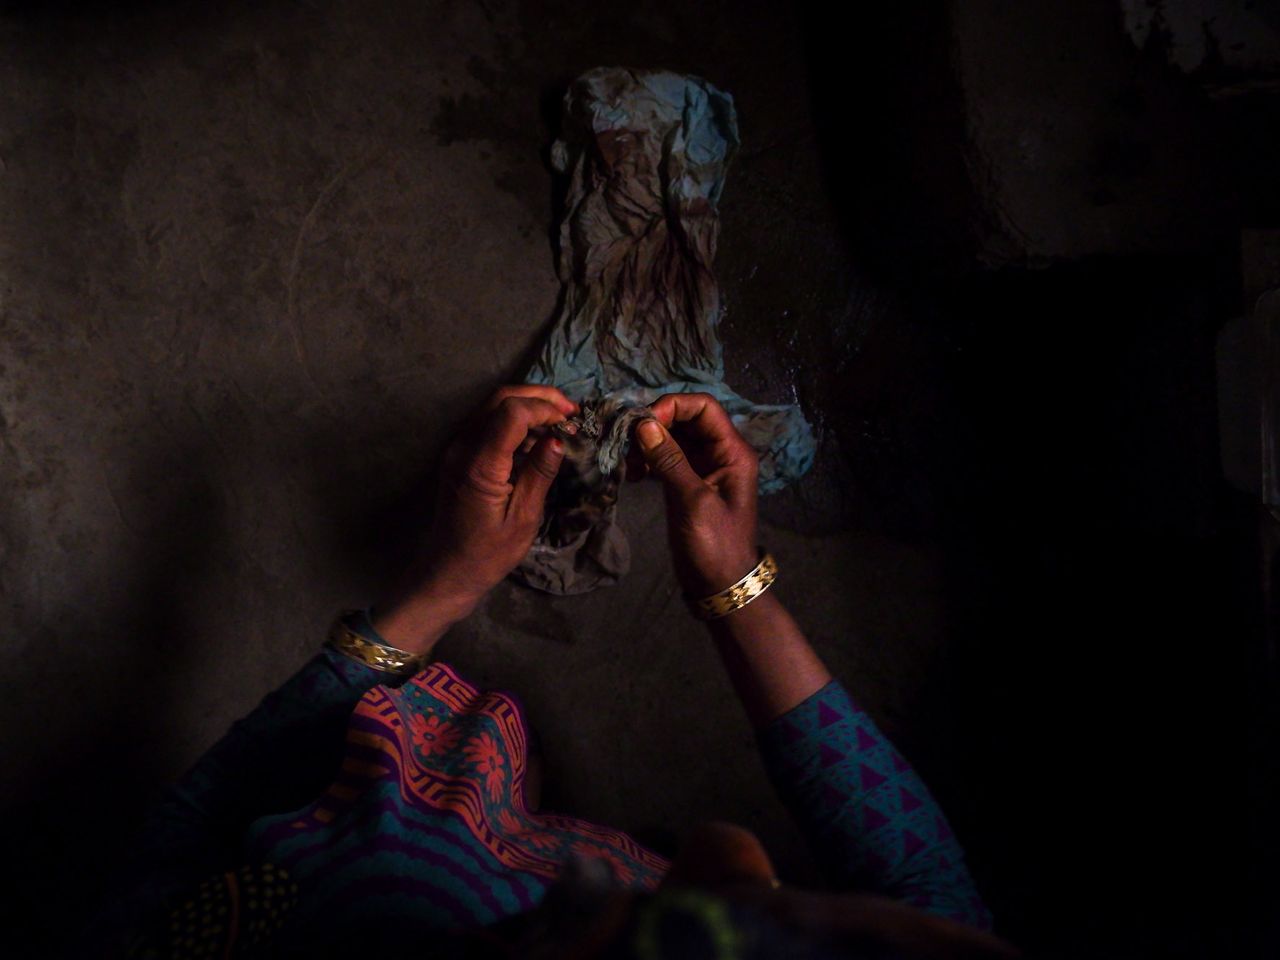 Naseema, 35, washes an old blue scarf that she uses instead of sanitary pads during her periods at her home. Naseema says she can’t afford sanitary protection and that her priority is to feed her children. “We have built a house, but only one room is liveable. My husband is a labourer. How can I afford a sanitary pad that costs, what, 50 Indian rupees? I don’t know, I’ve never bought one,” Naseema says, pointing at the earthen floor and glassless windows of her house. Date: 19 April,2022.